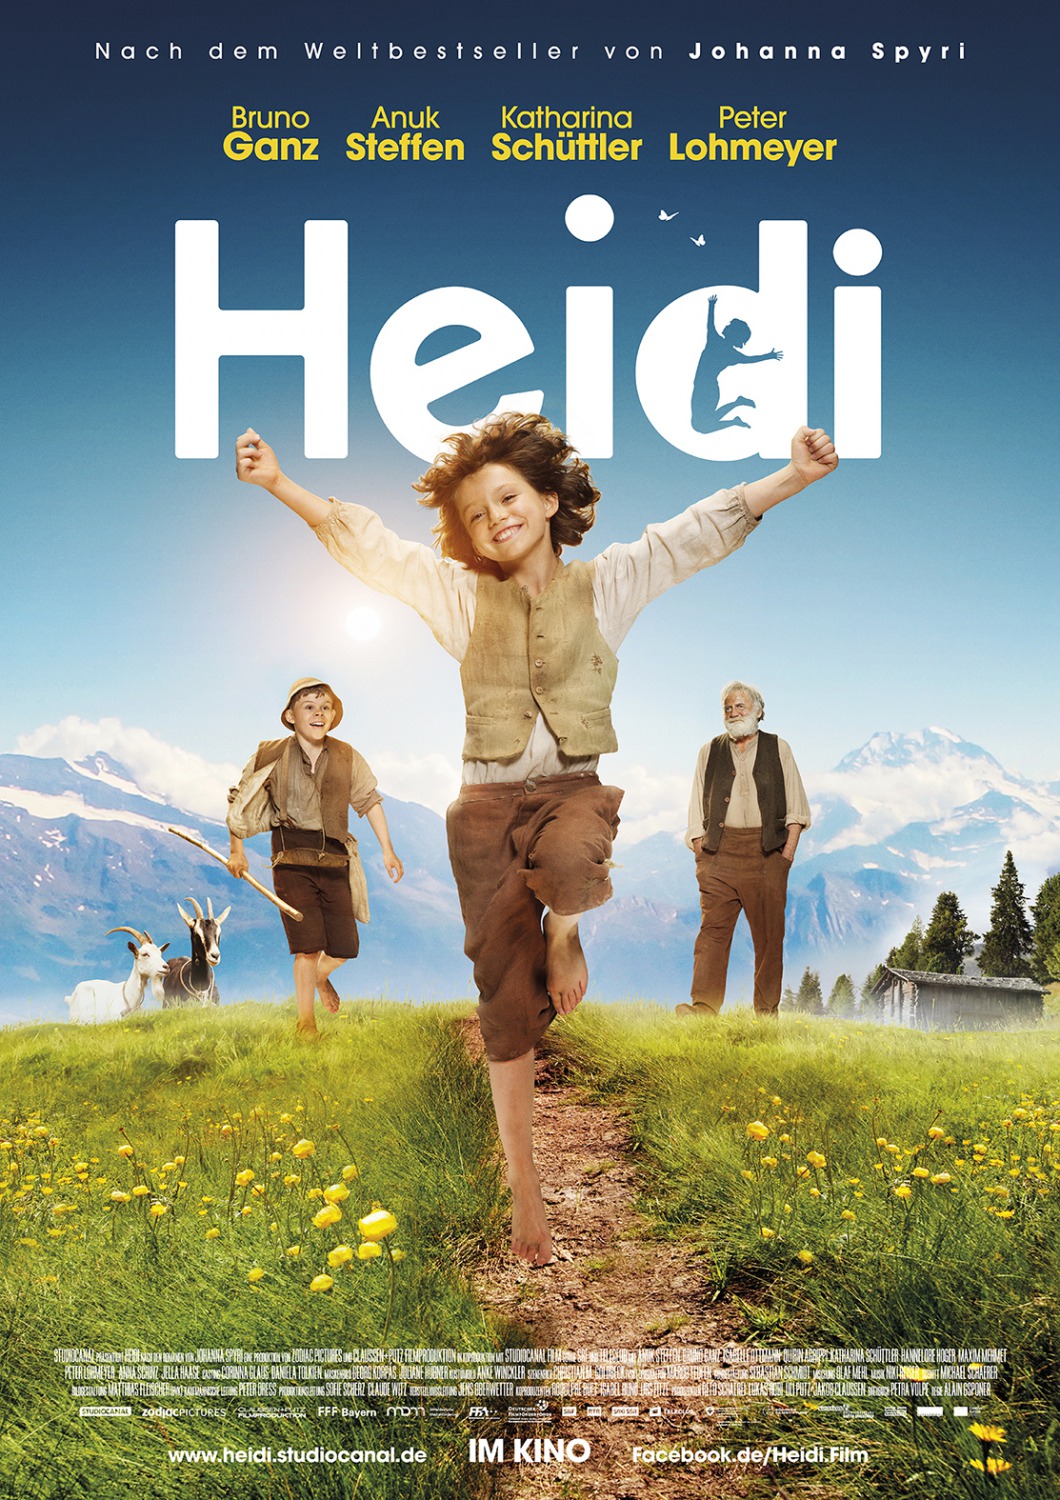 Extra Large Movie Poster Image for Heidi (#6 of 6)